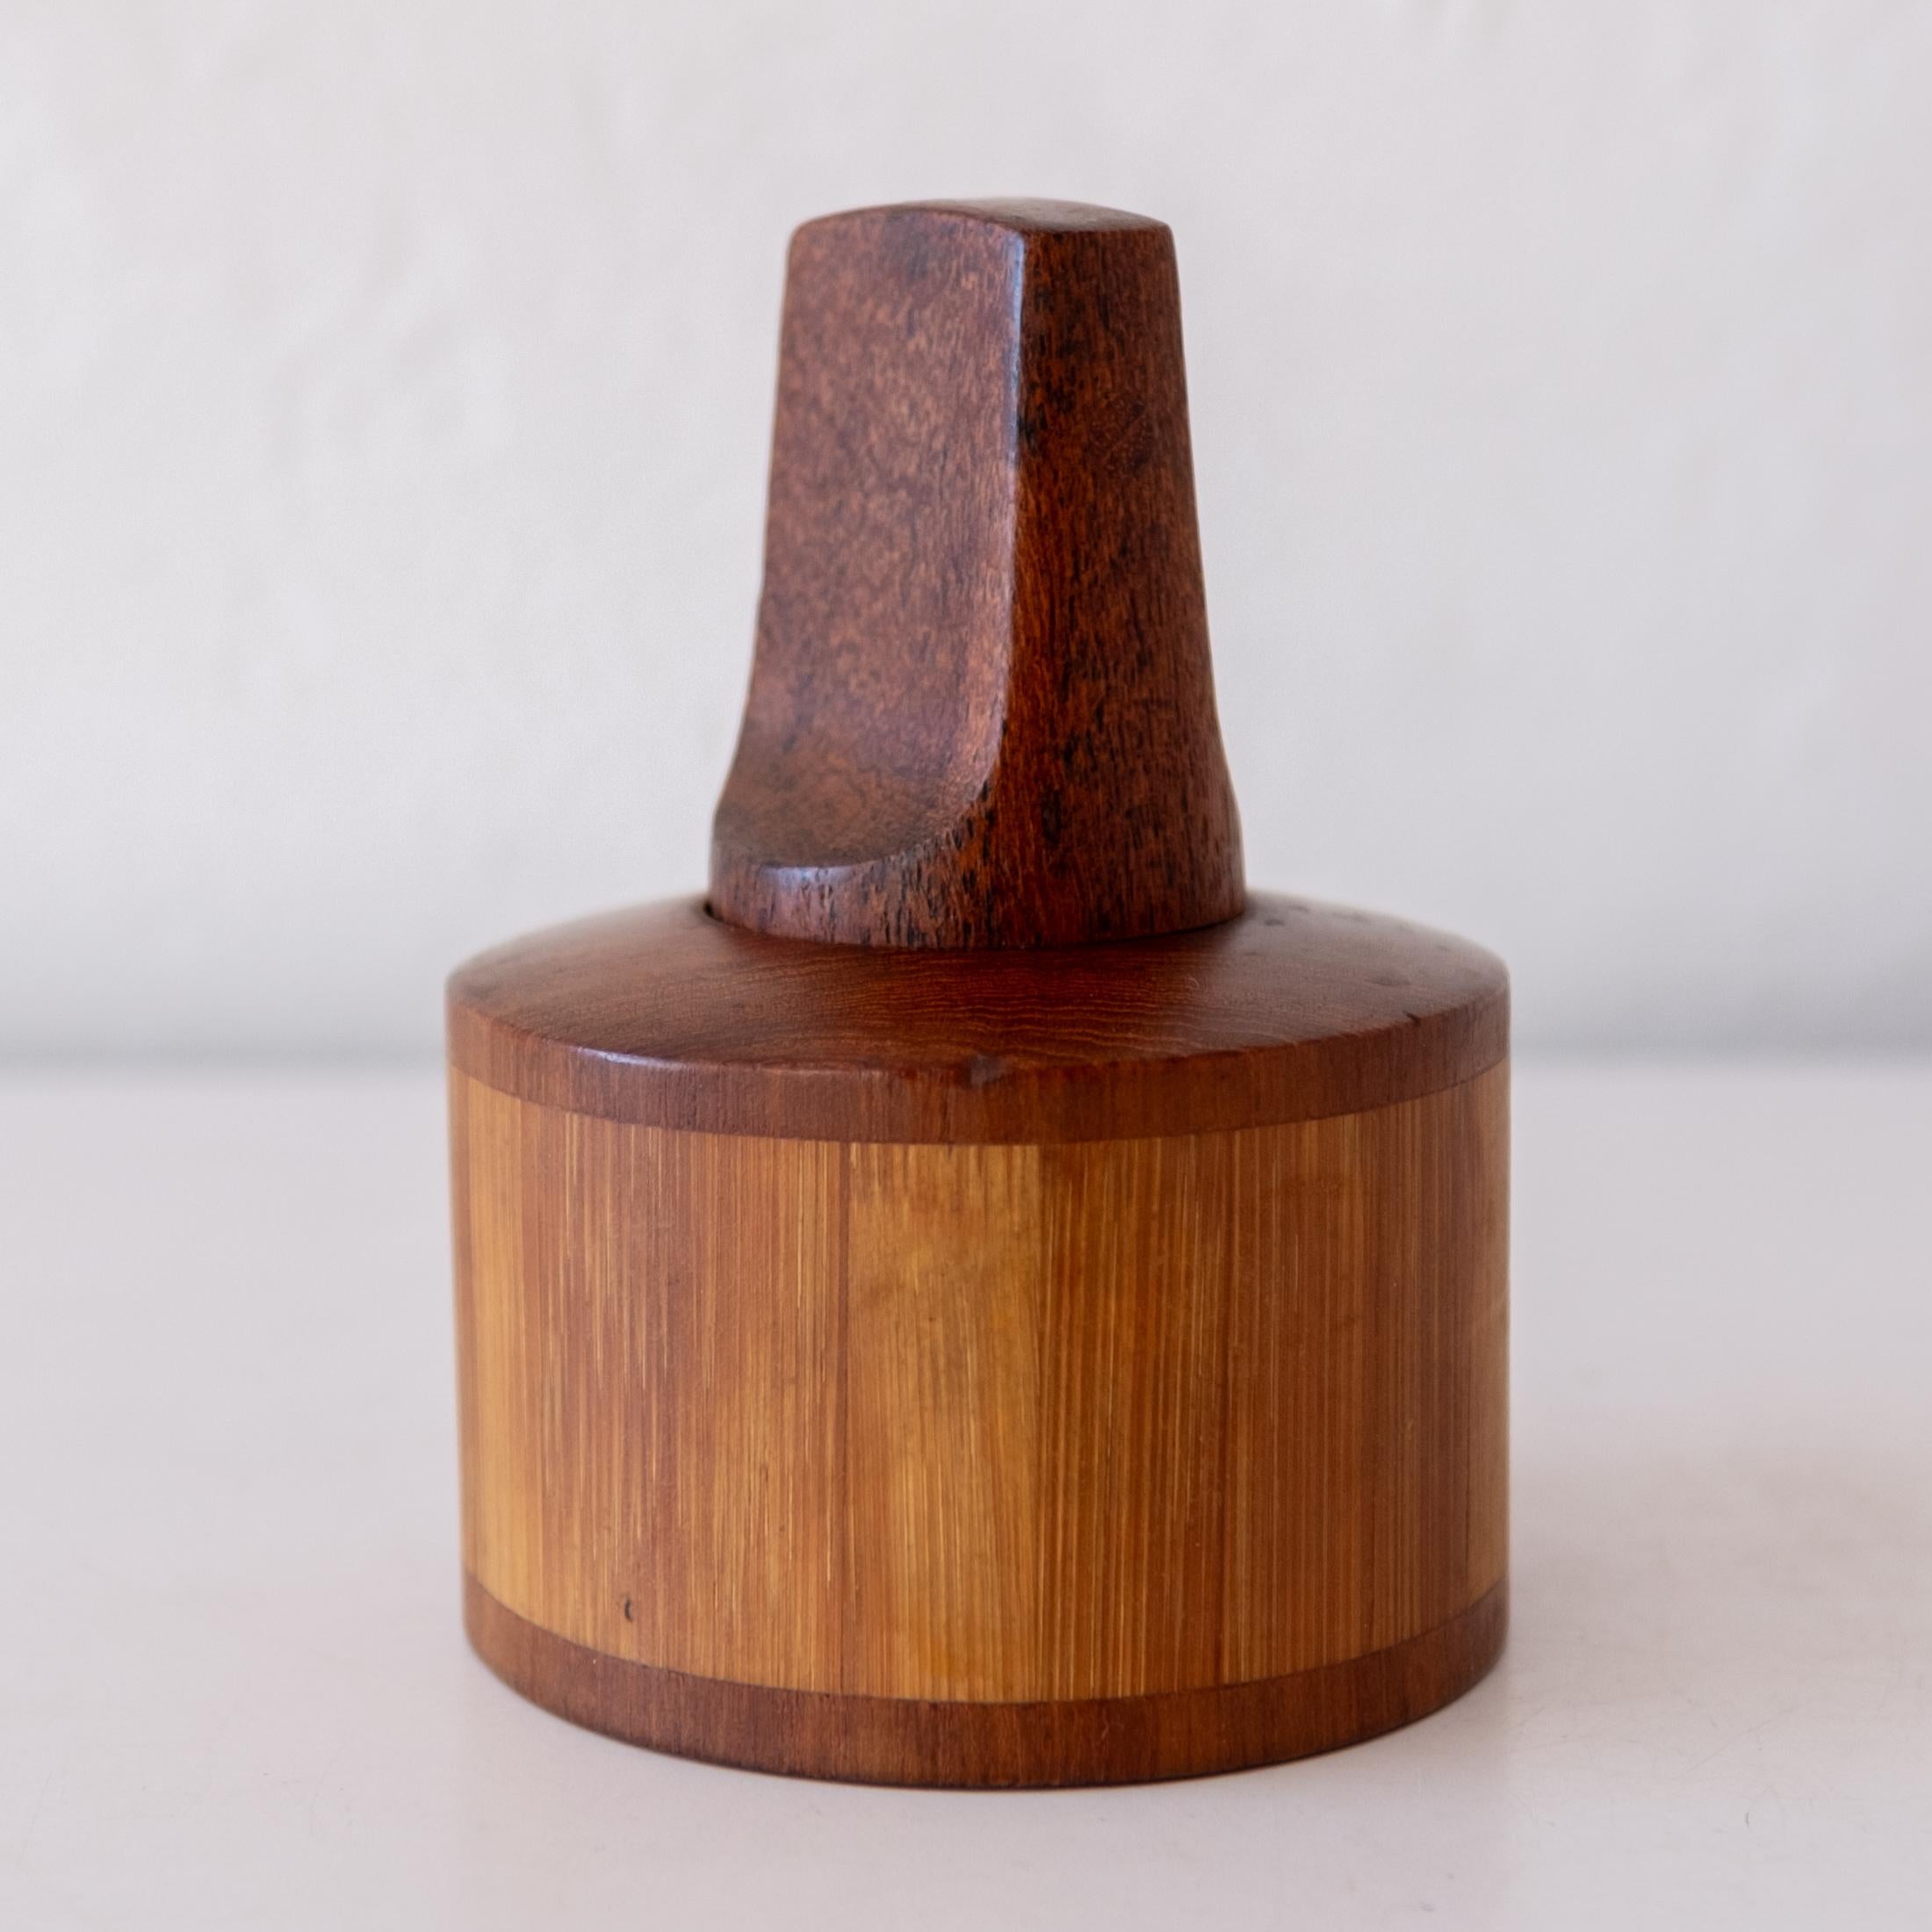 Early teak and cane/bamboo pepper mill by Jens Quistgaard. Metal grinding mechanisms produced by Peugeot Freres. The mill was produced by Dansk in Denmark. Marked DANMARK.